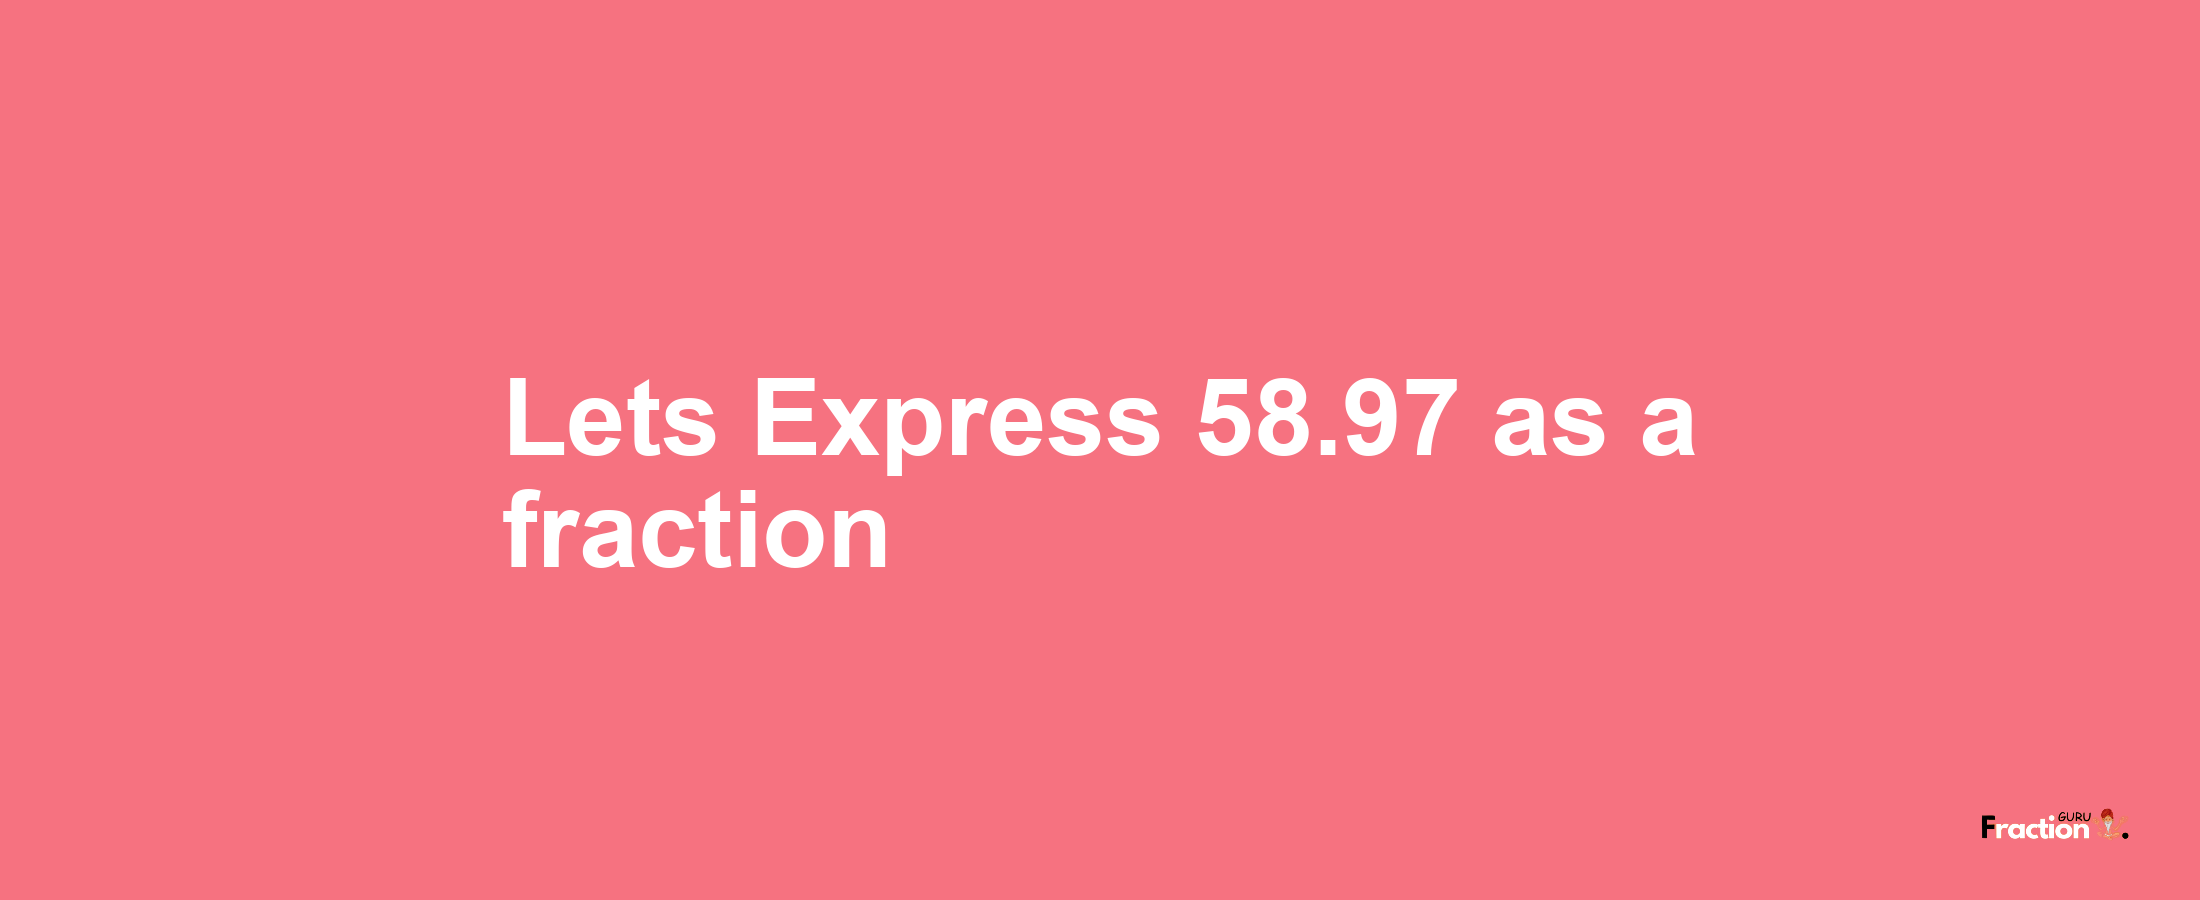 Lets Express 58.97 as afraction